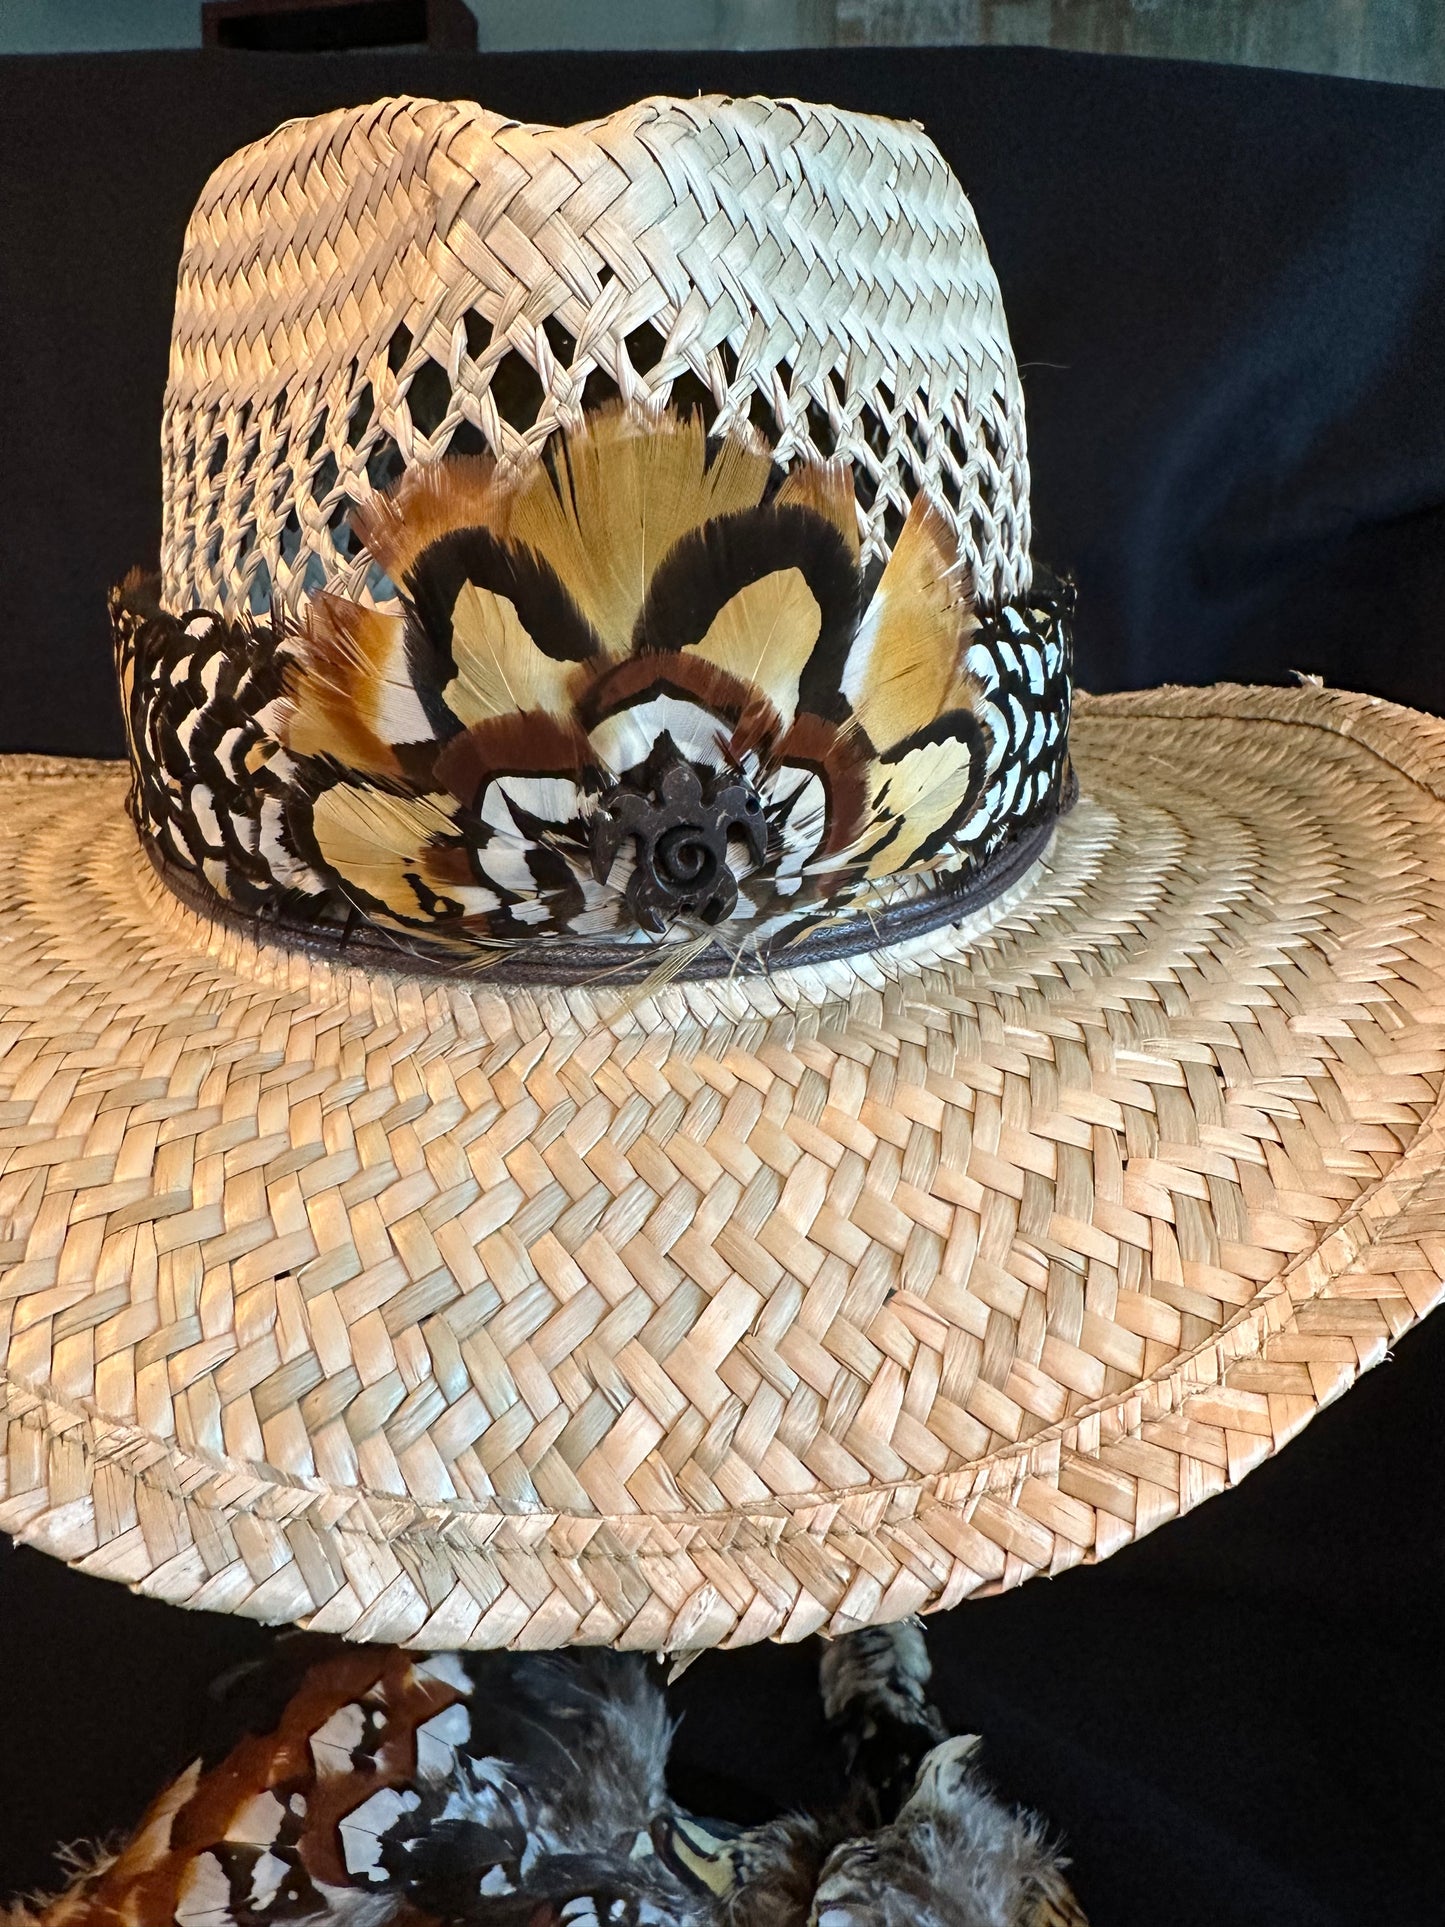 Reeves Paniolo (Cowboy) style Humu Papale (feather hatband)